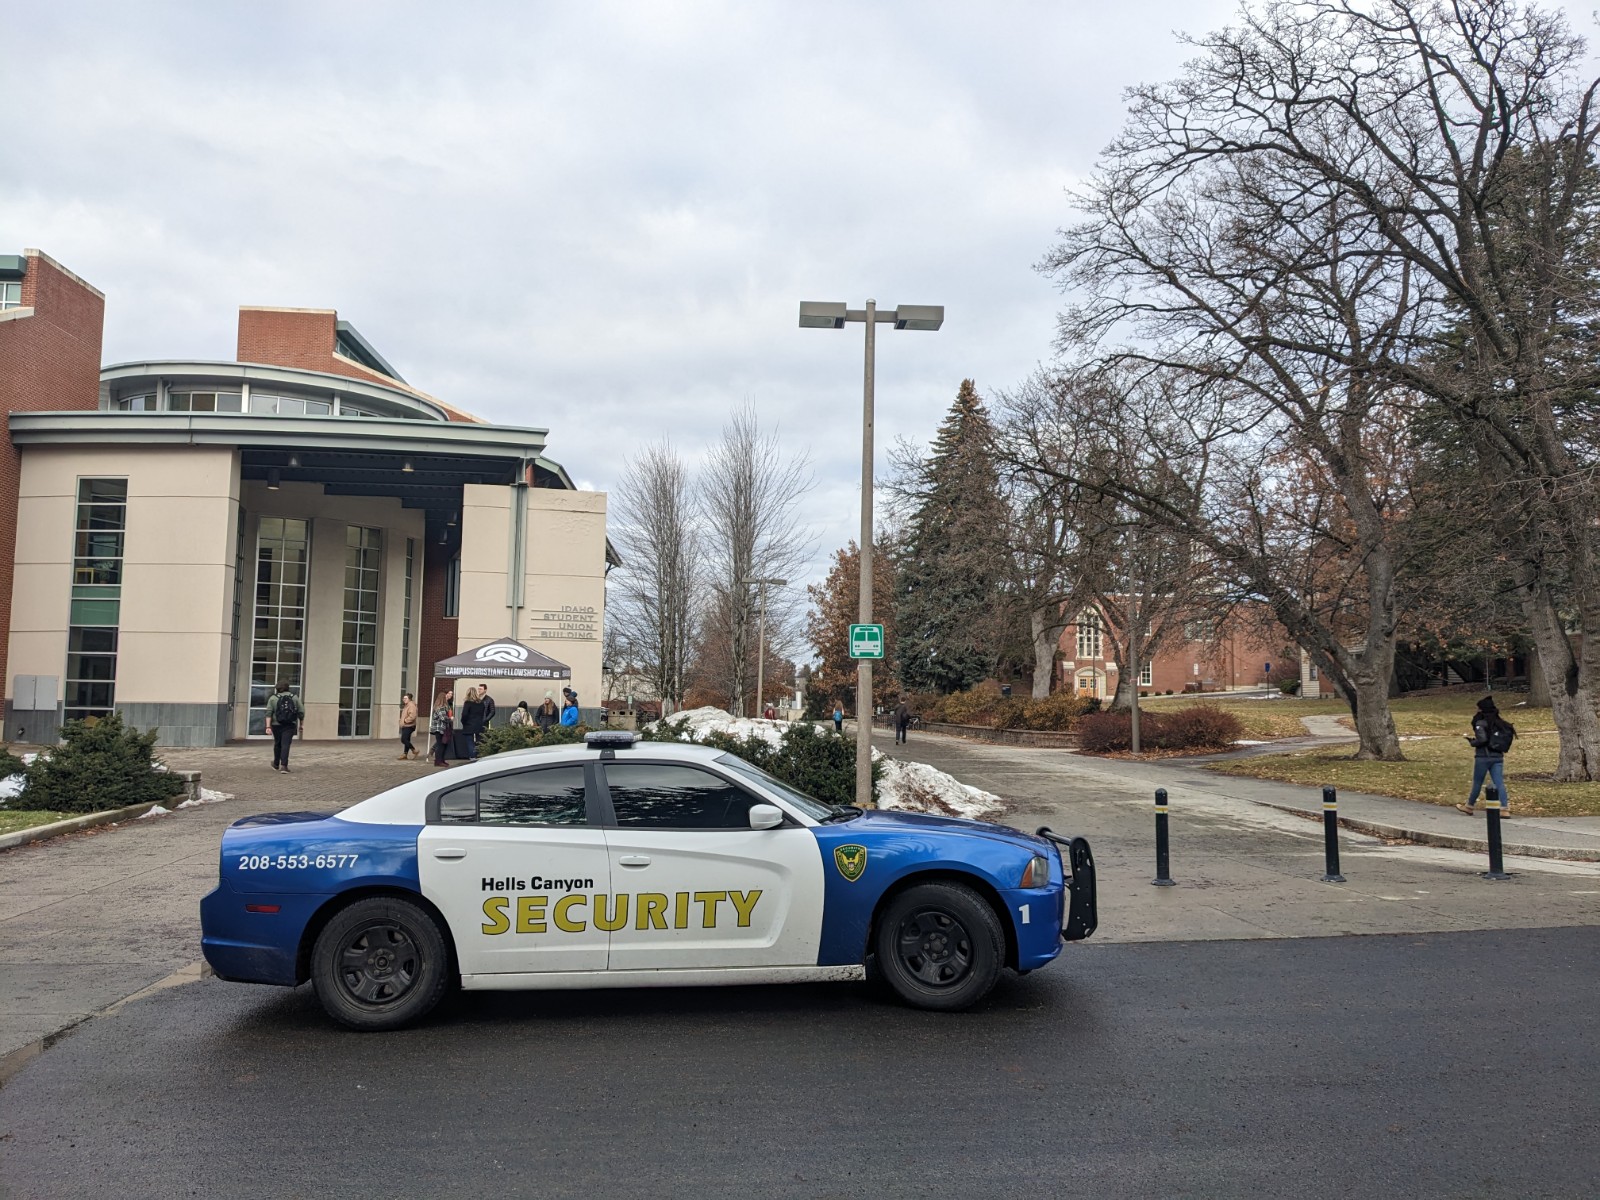 A security cruiser is parked in front of a brick building at the University of Idaho.